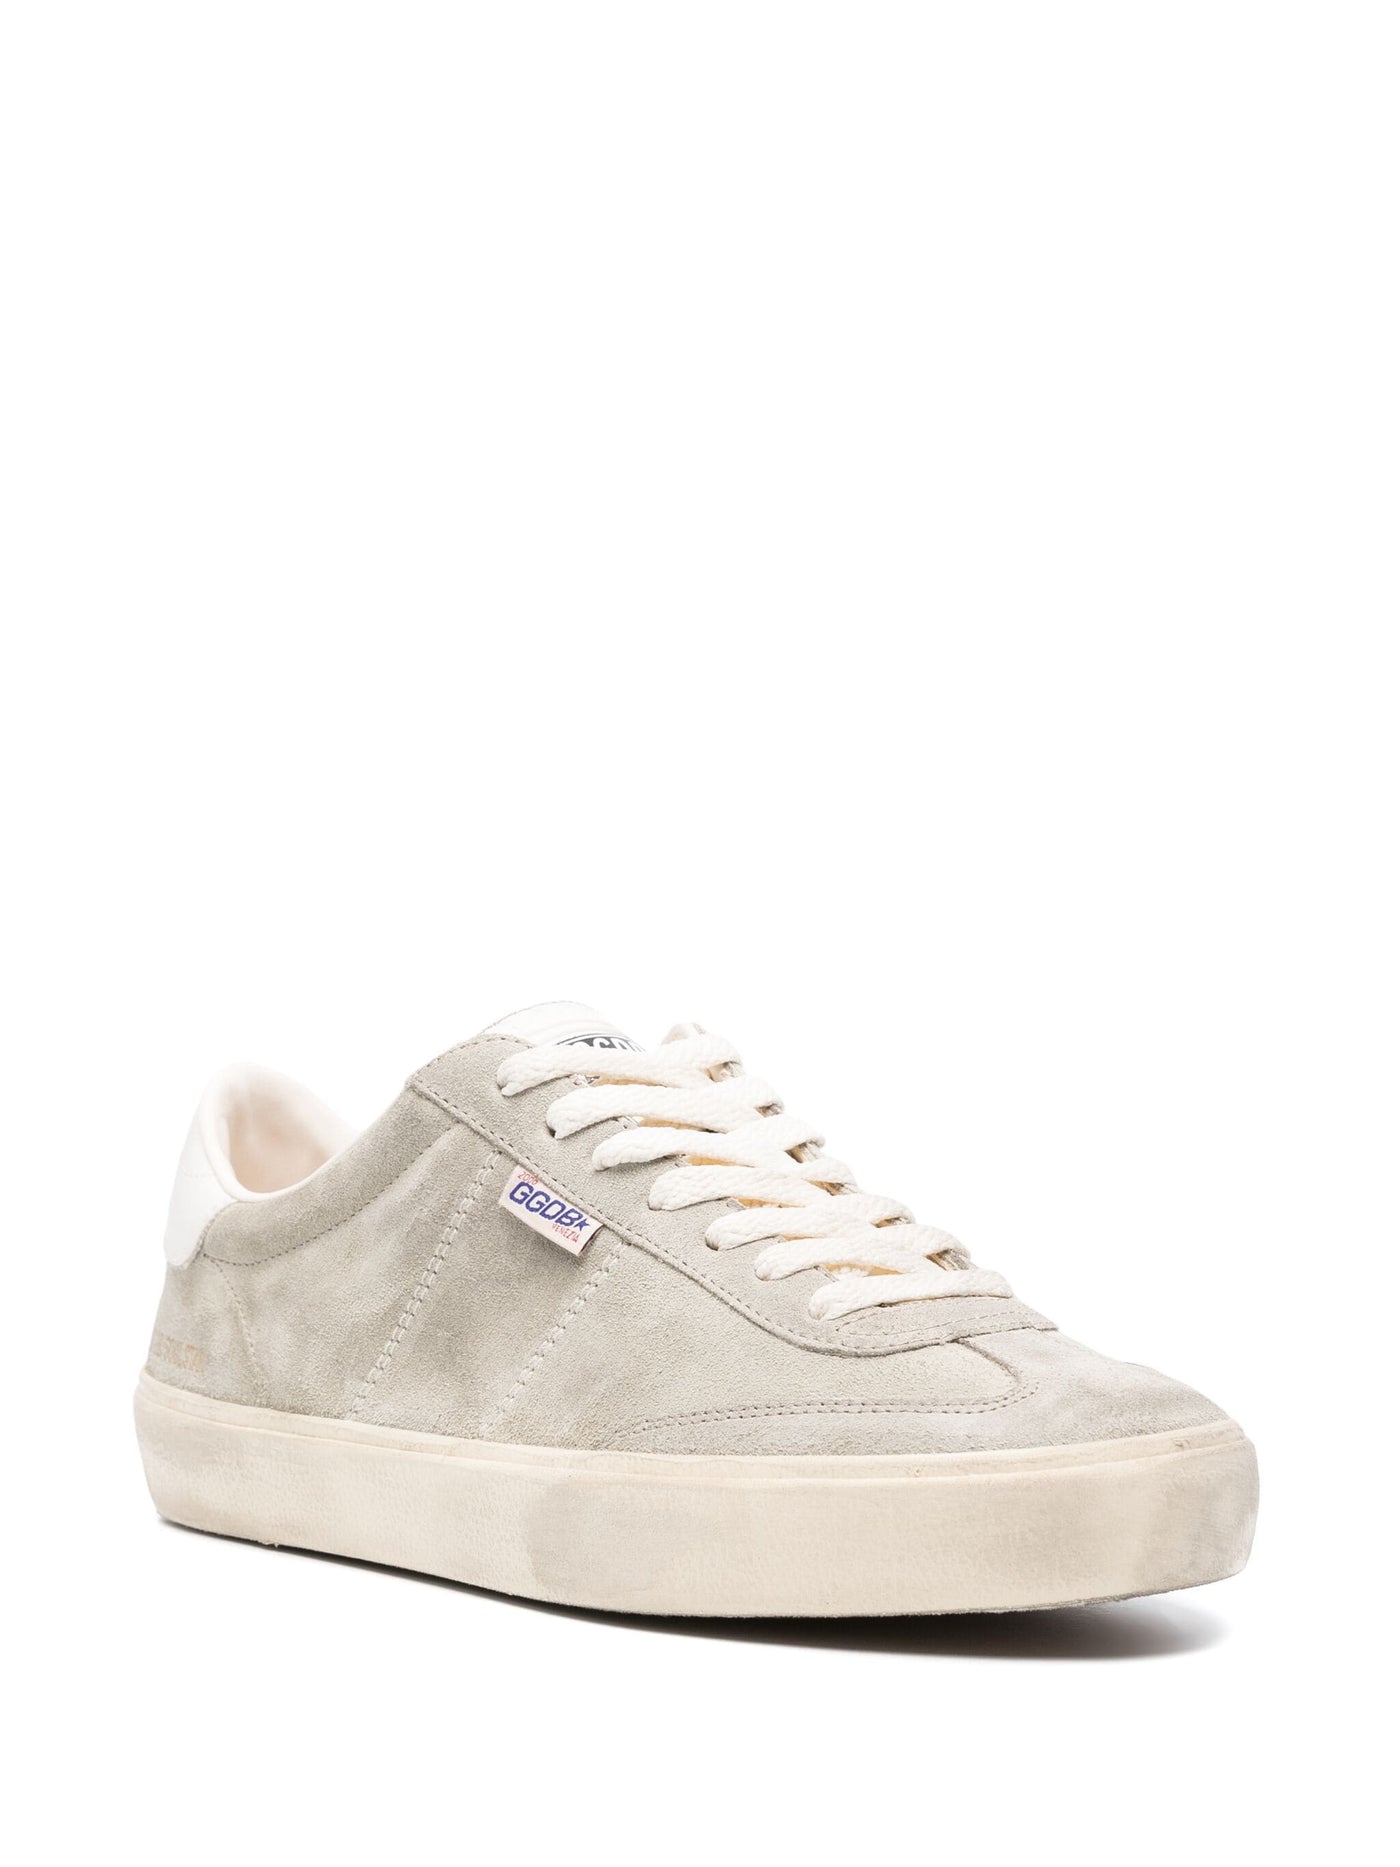 MEN'S SOUL STAR SNEAKER - SUEDE TAUPE